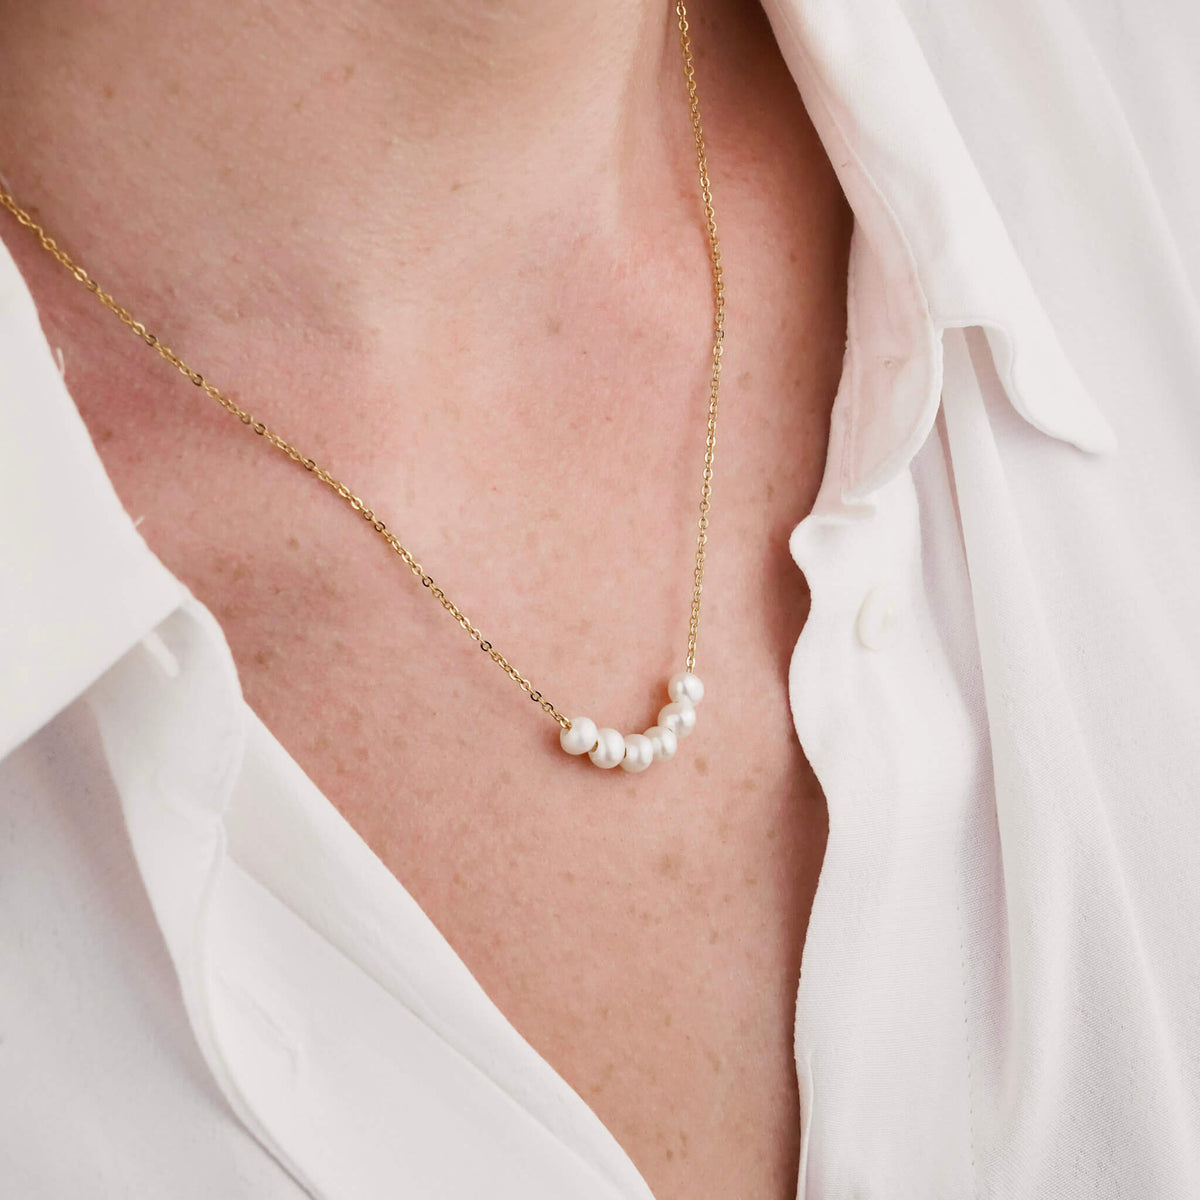 pearl necklace on a model. There are 6 pearls on a dainty stainless steel chain. 